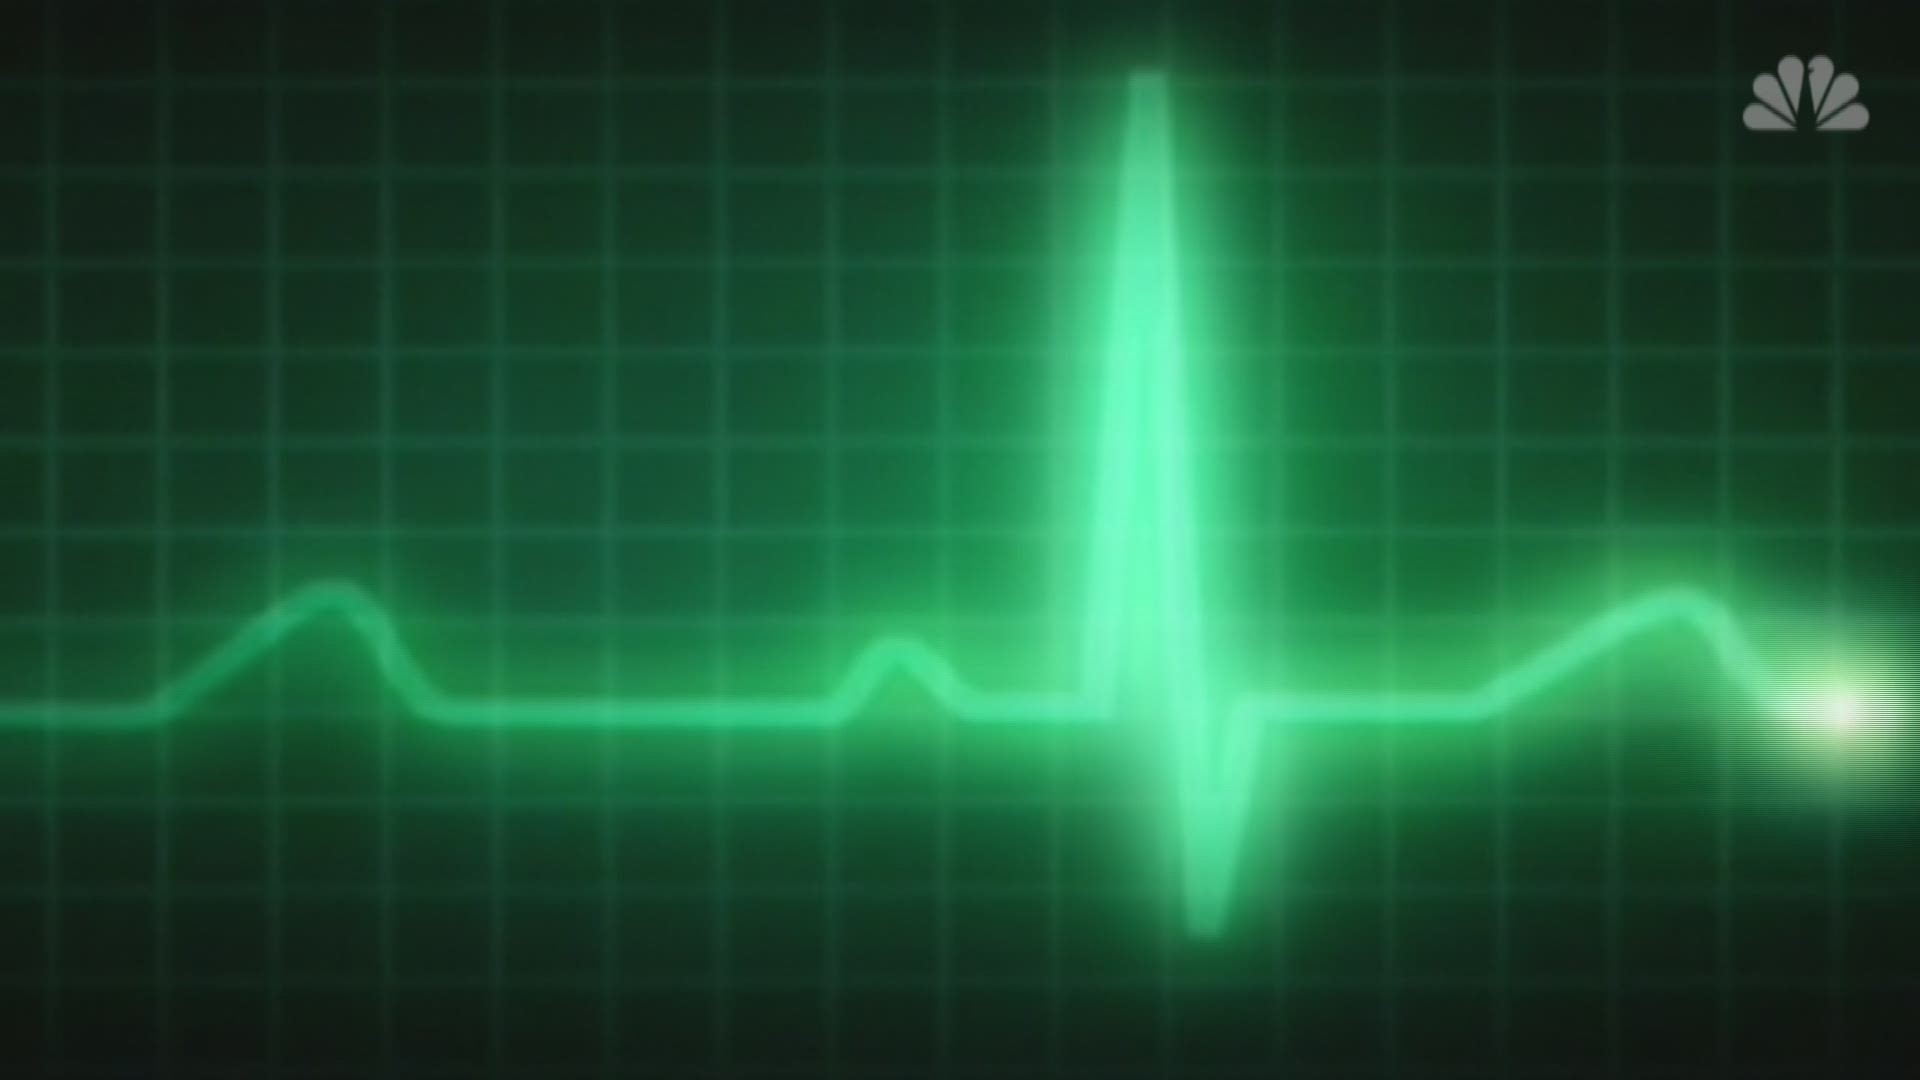 A new report from the CDC shows a growing number of Americans know the signs and symptoms of a heart attack. But some groups lag behind in knowledge. NBC's Erika Edwards reports.